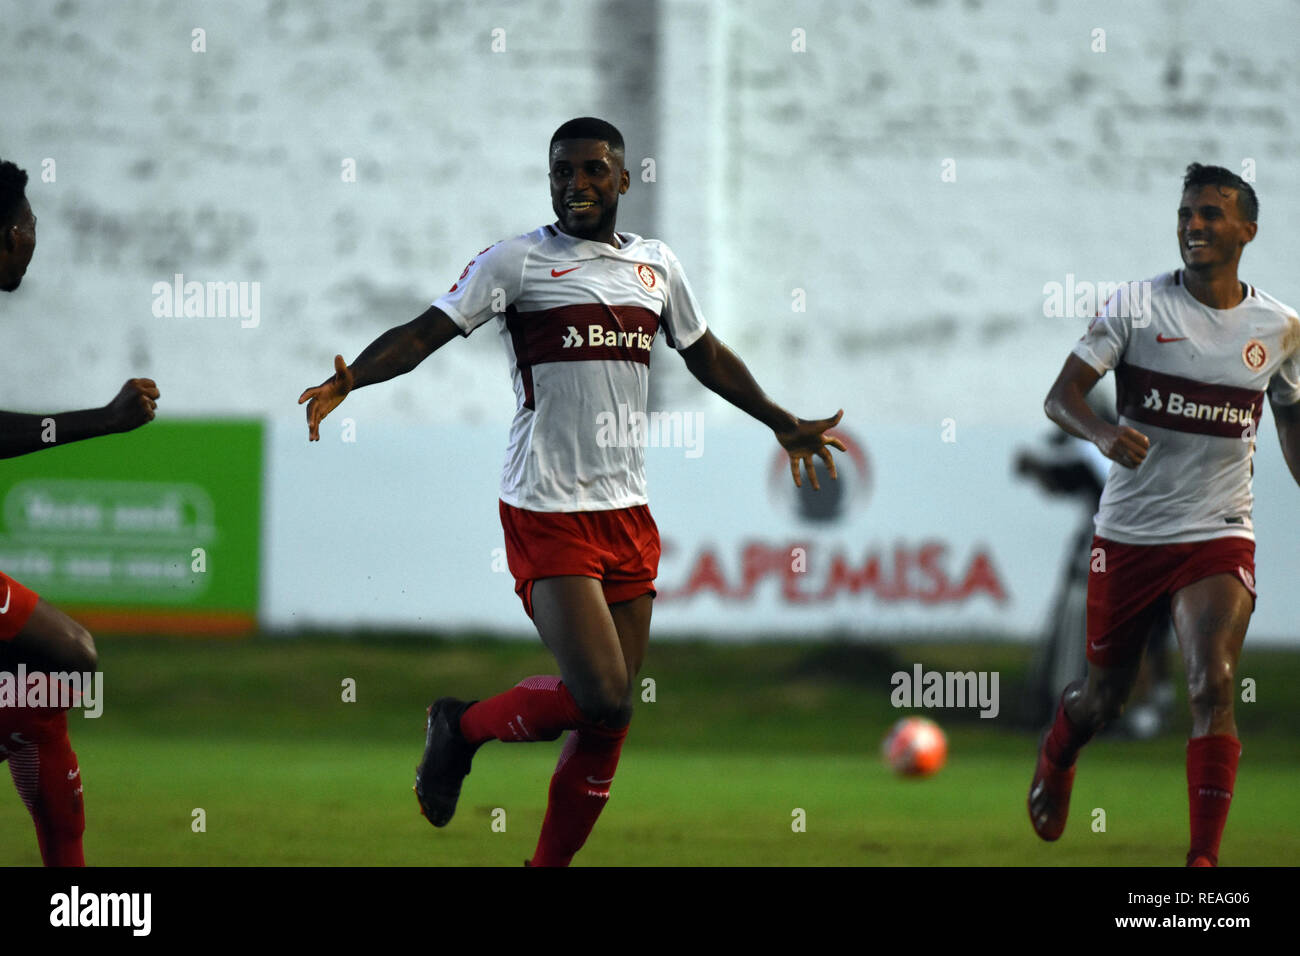 RS - Iju - 20/01/2019 - GAUCH O 2019, S o Luiz x Internacional - Inter player Emerson Santos celebrates his goal during a match against S o Luiz in the October 19 th stage for the State Championship 2019. Photo: Renato Padilha / AGIF Stock Photo